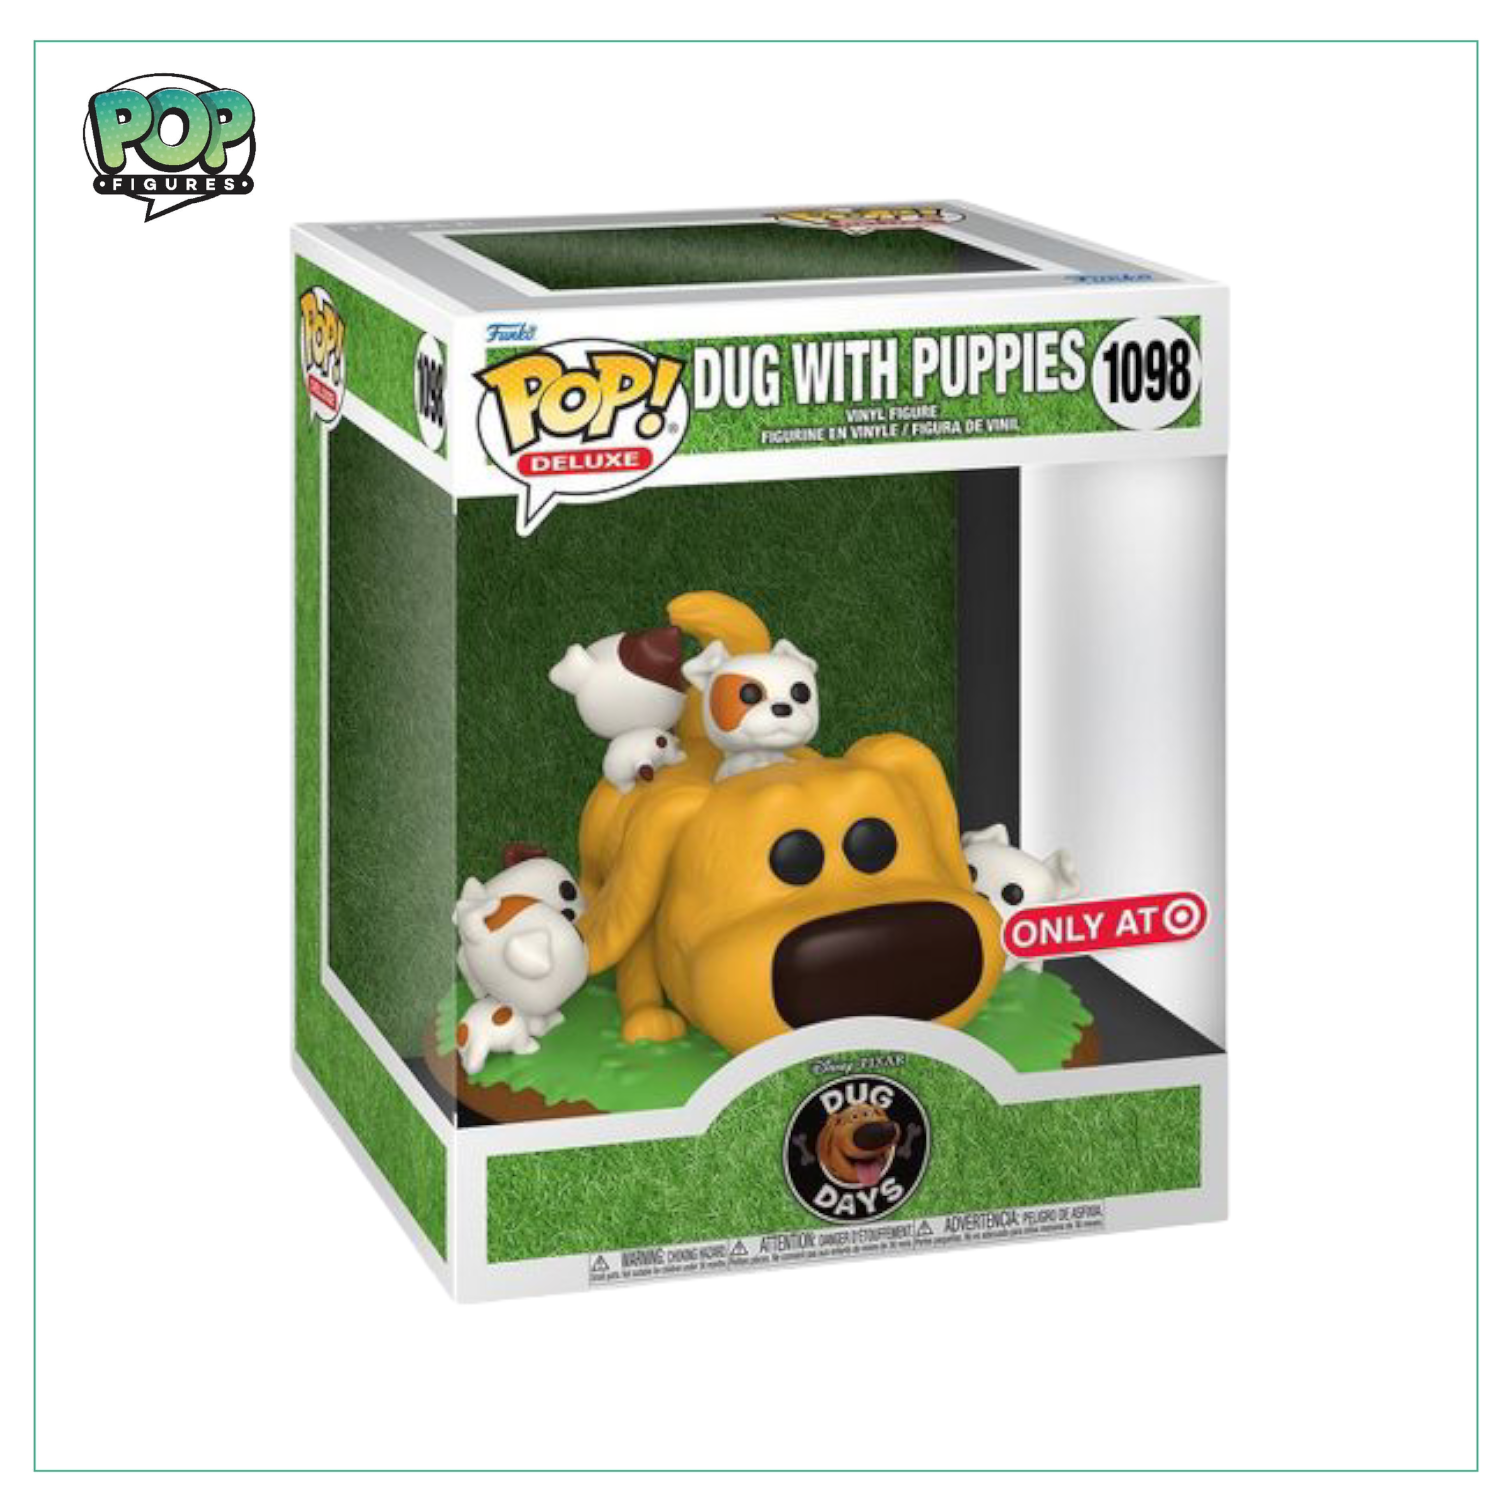 Funko Pop Pets! Toys Make Dogs & Cats Extra Cute